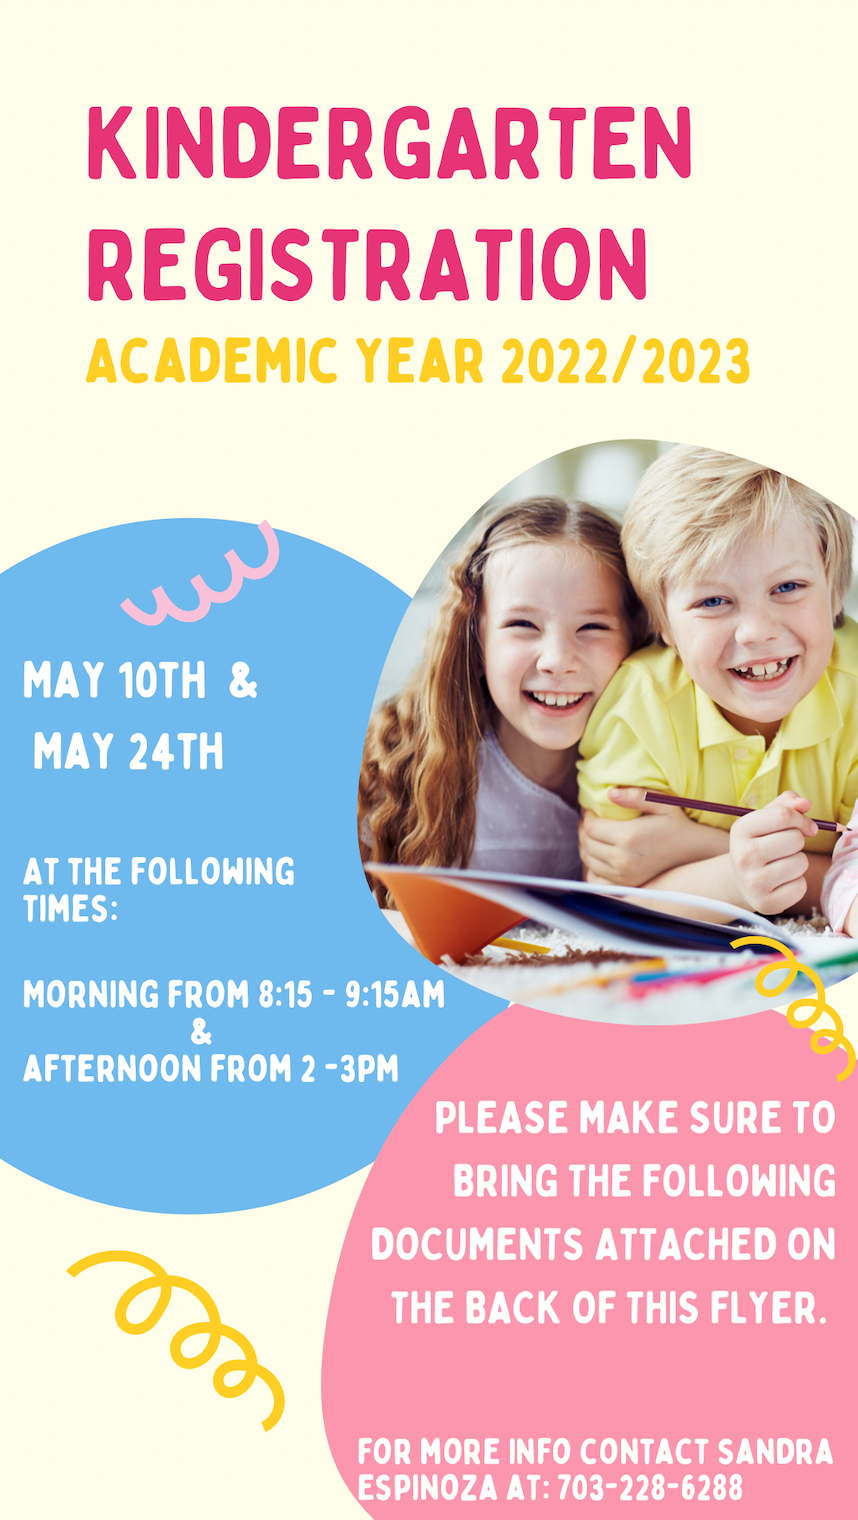 Kindergarten Registration for 2022/2023 on May 10 and May 24 from 8:15 - 9:15 and 2:00 - 3:00